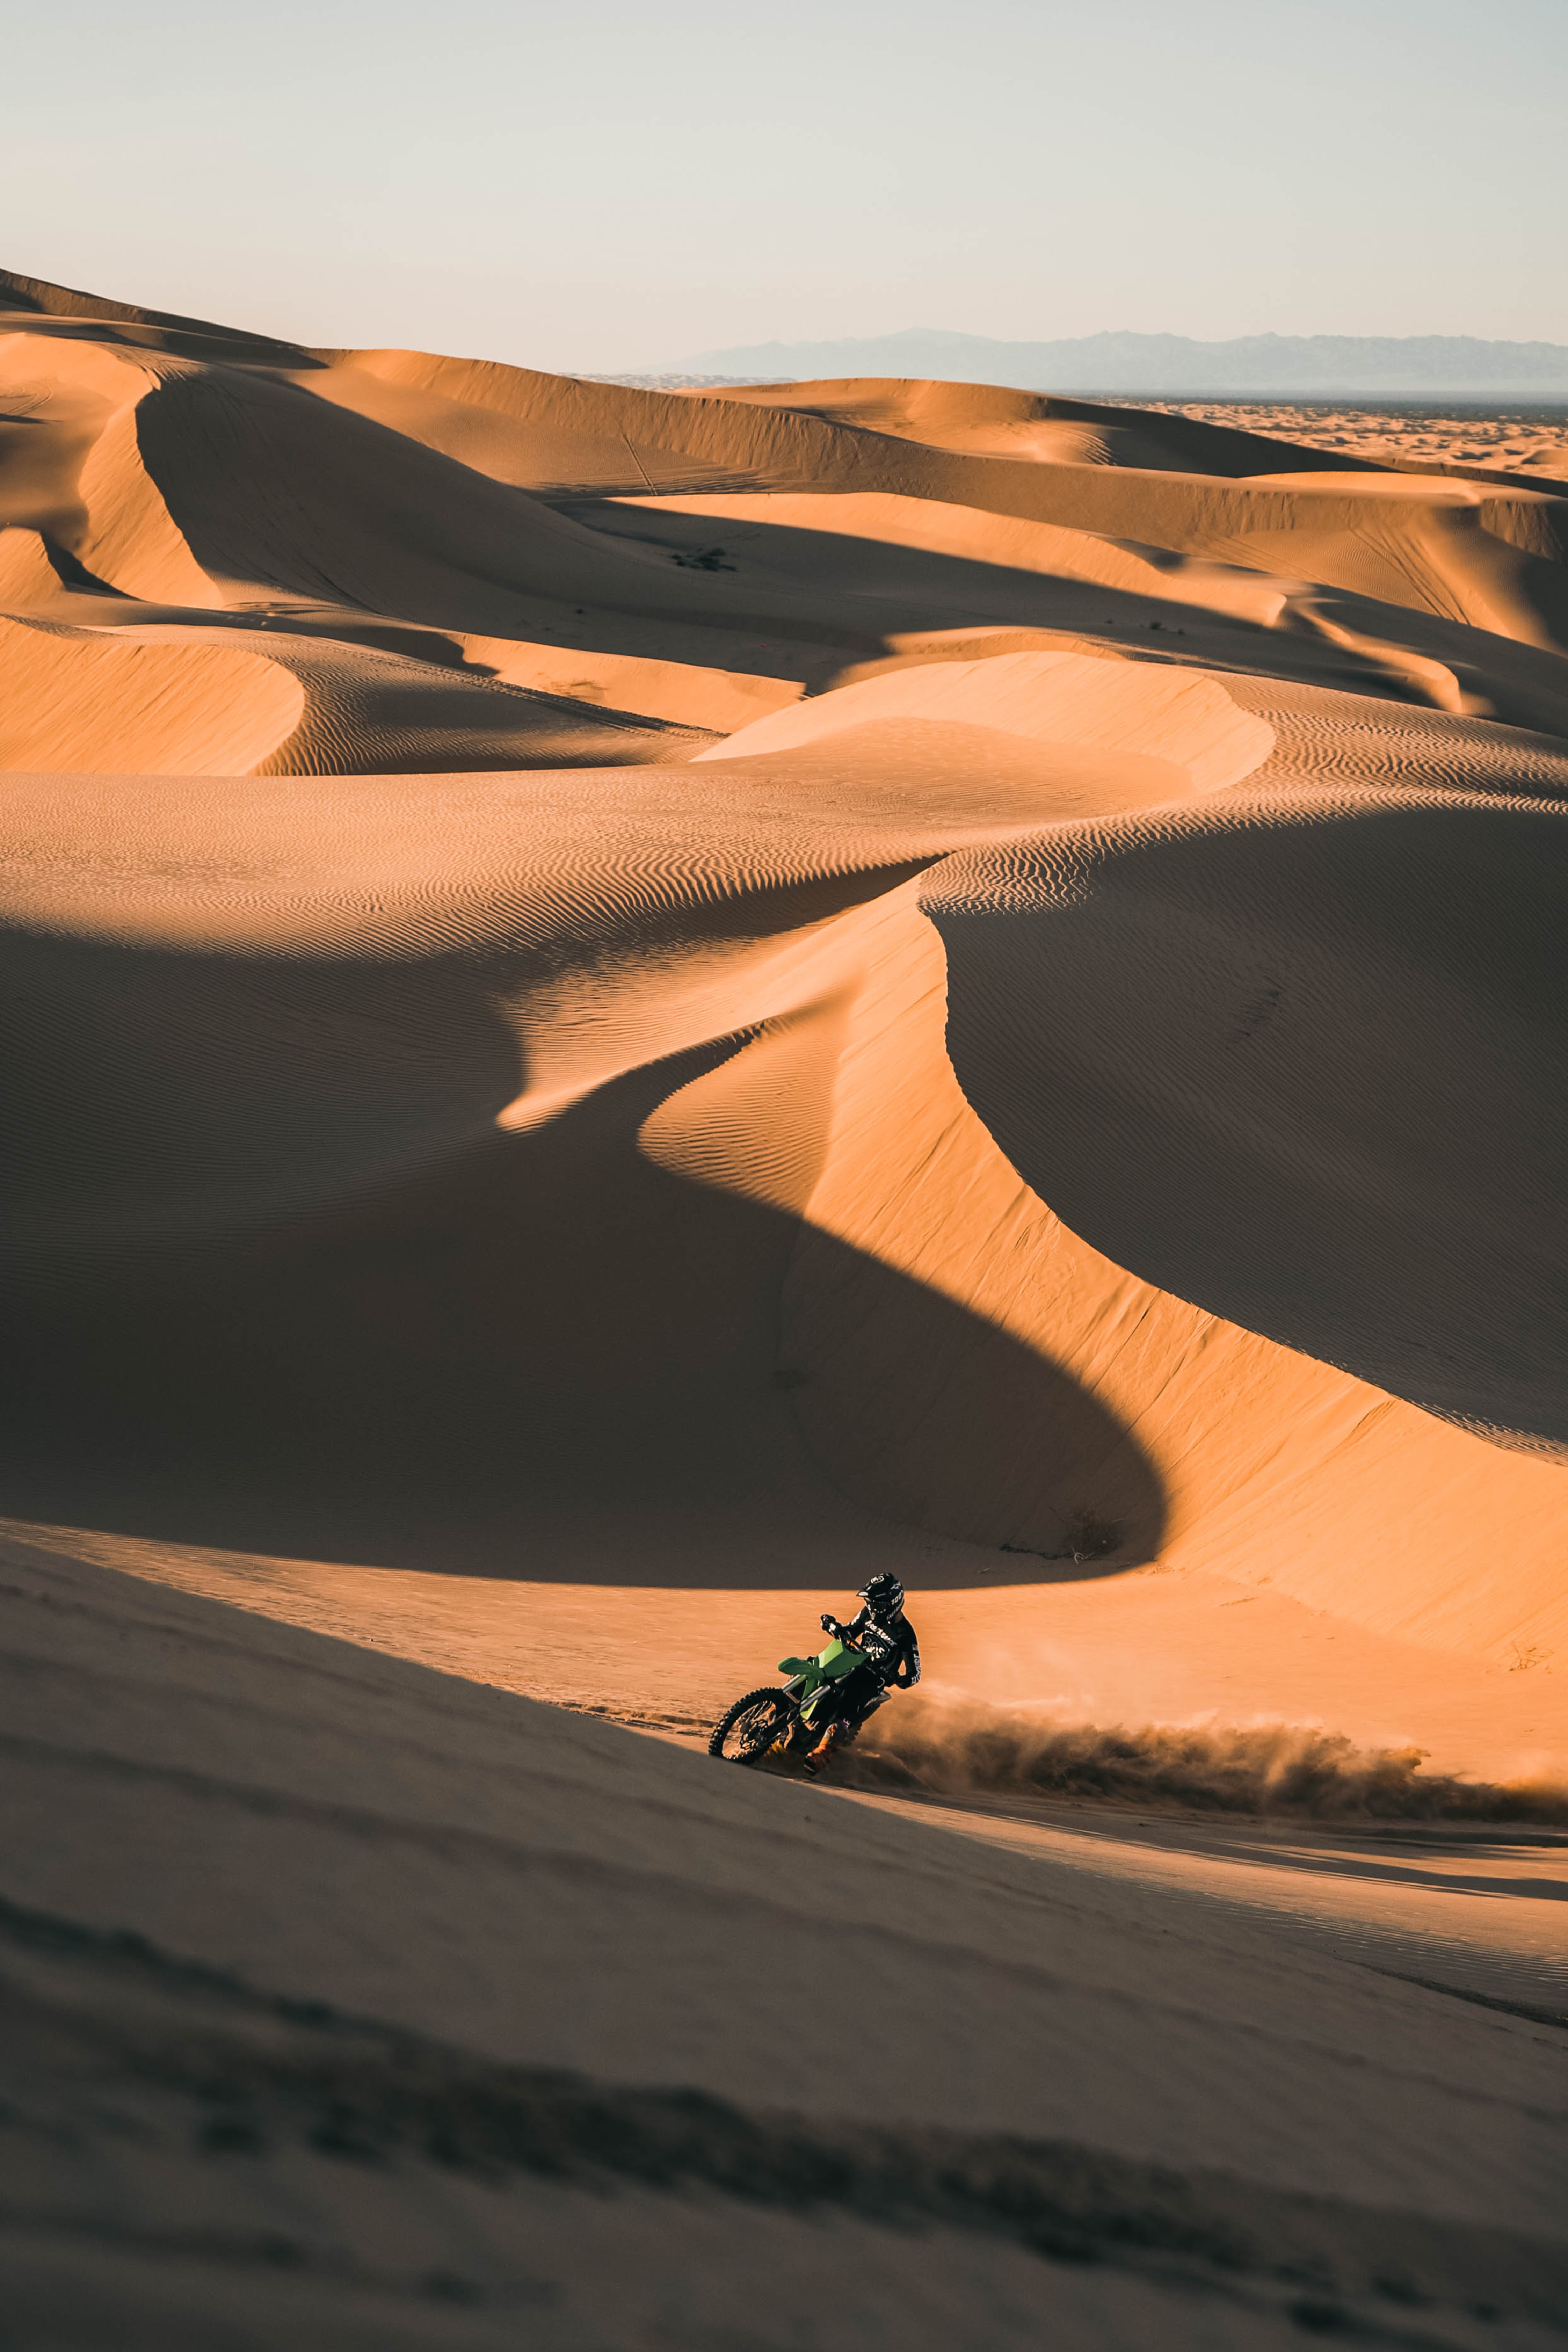 ktm, sand, motorcycles, desert, rally, motorcyclist, motorcycle